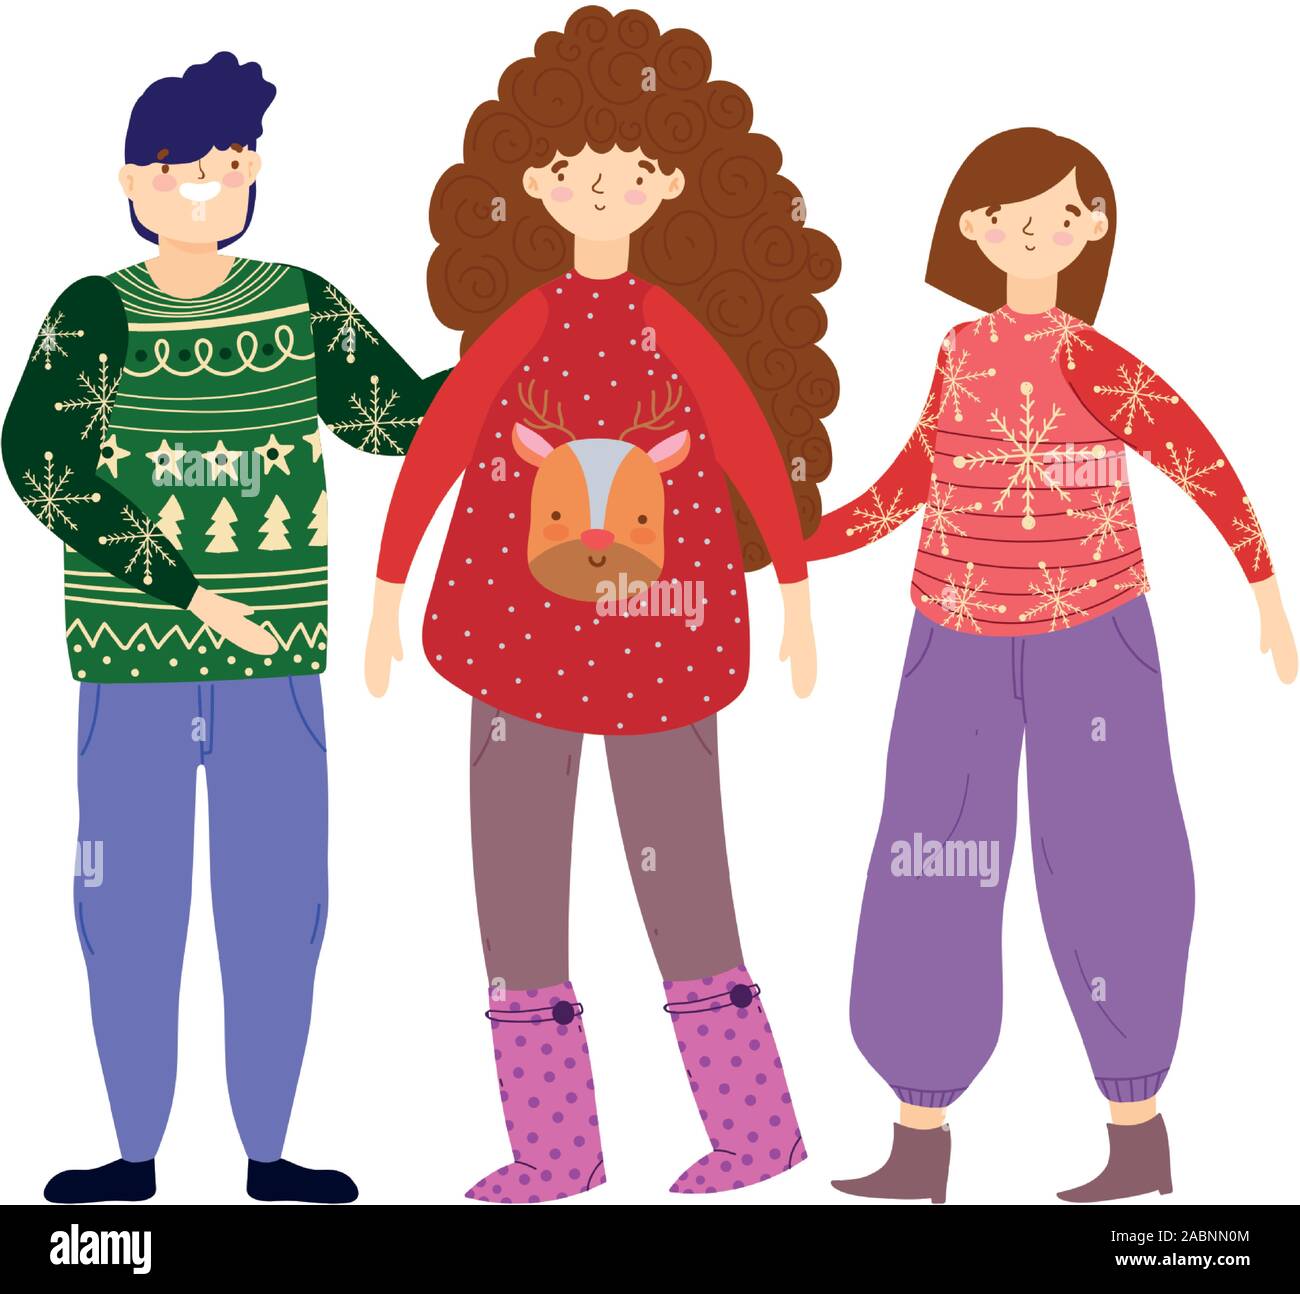 merry christmas celebration people wearing ugly sweaters vector illustration Stock Vector